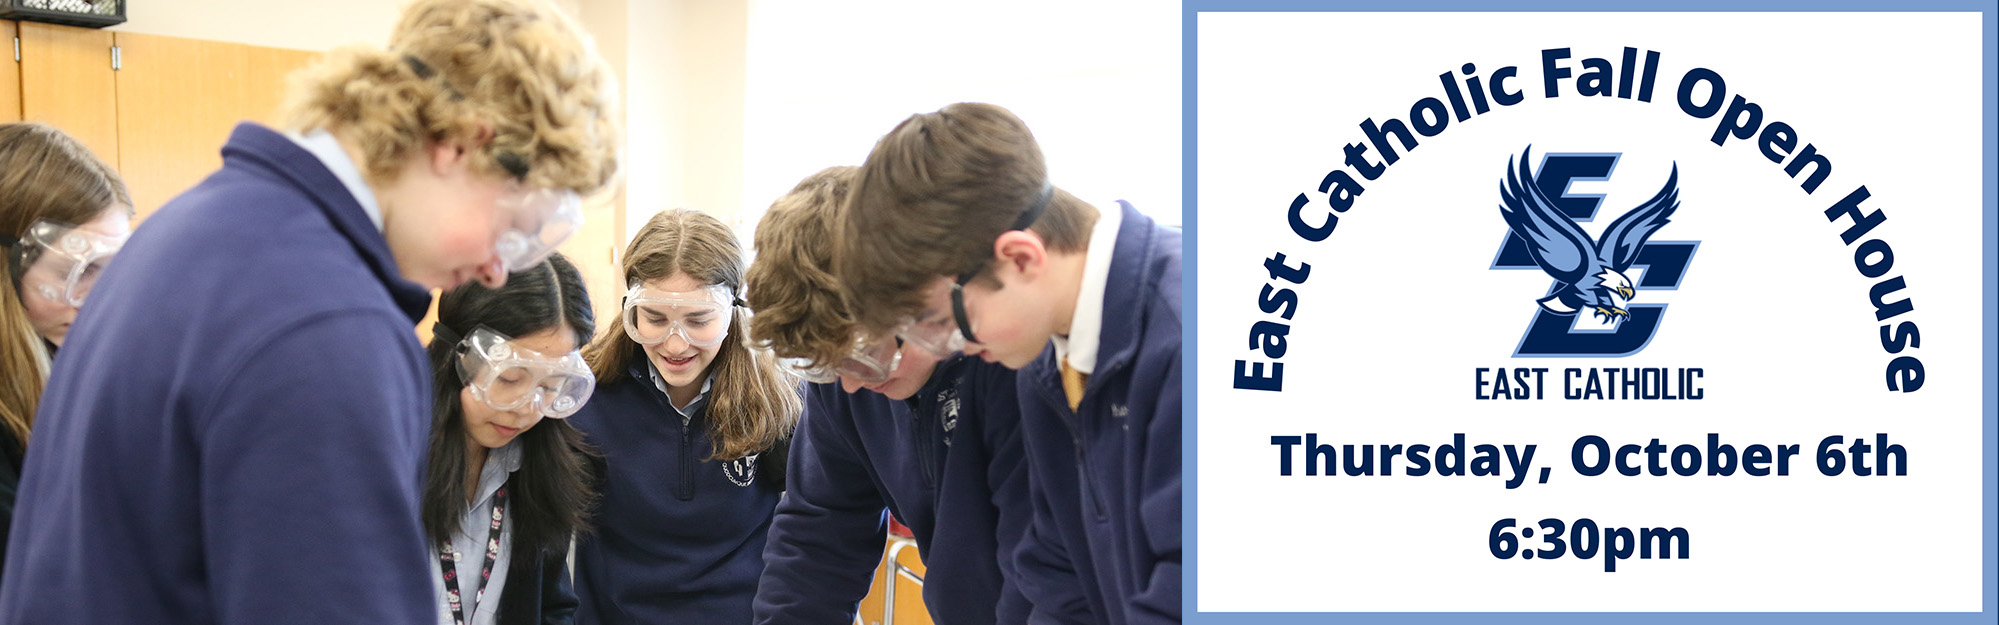 Students in safety googles working together on a project - East Catholic Fall Open House - Thursday, October 6 at 6:30 p.m.